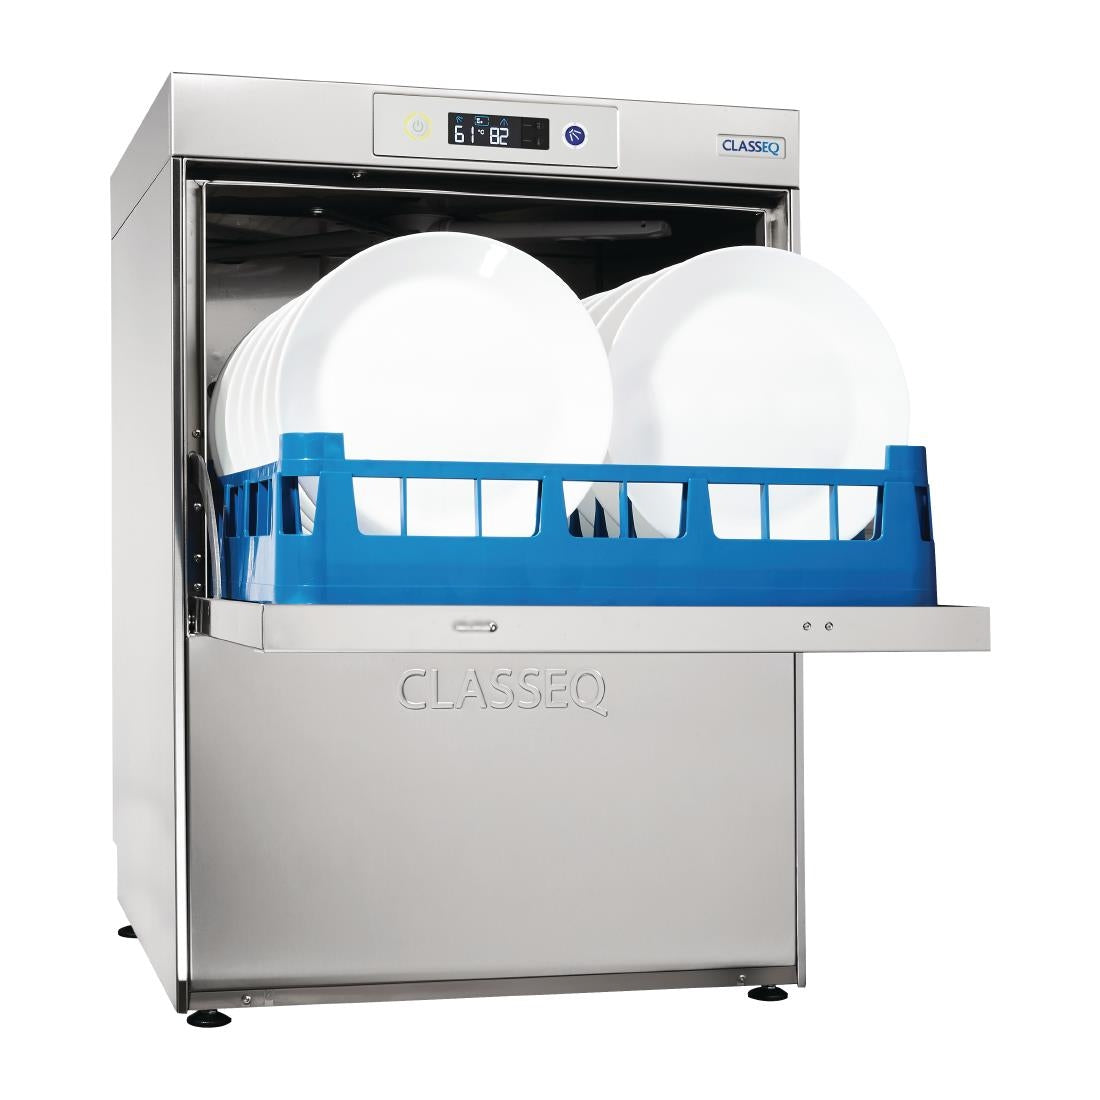 Classeq Dishwasher D500 Duo WS 13A with Install